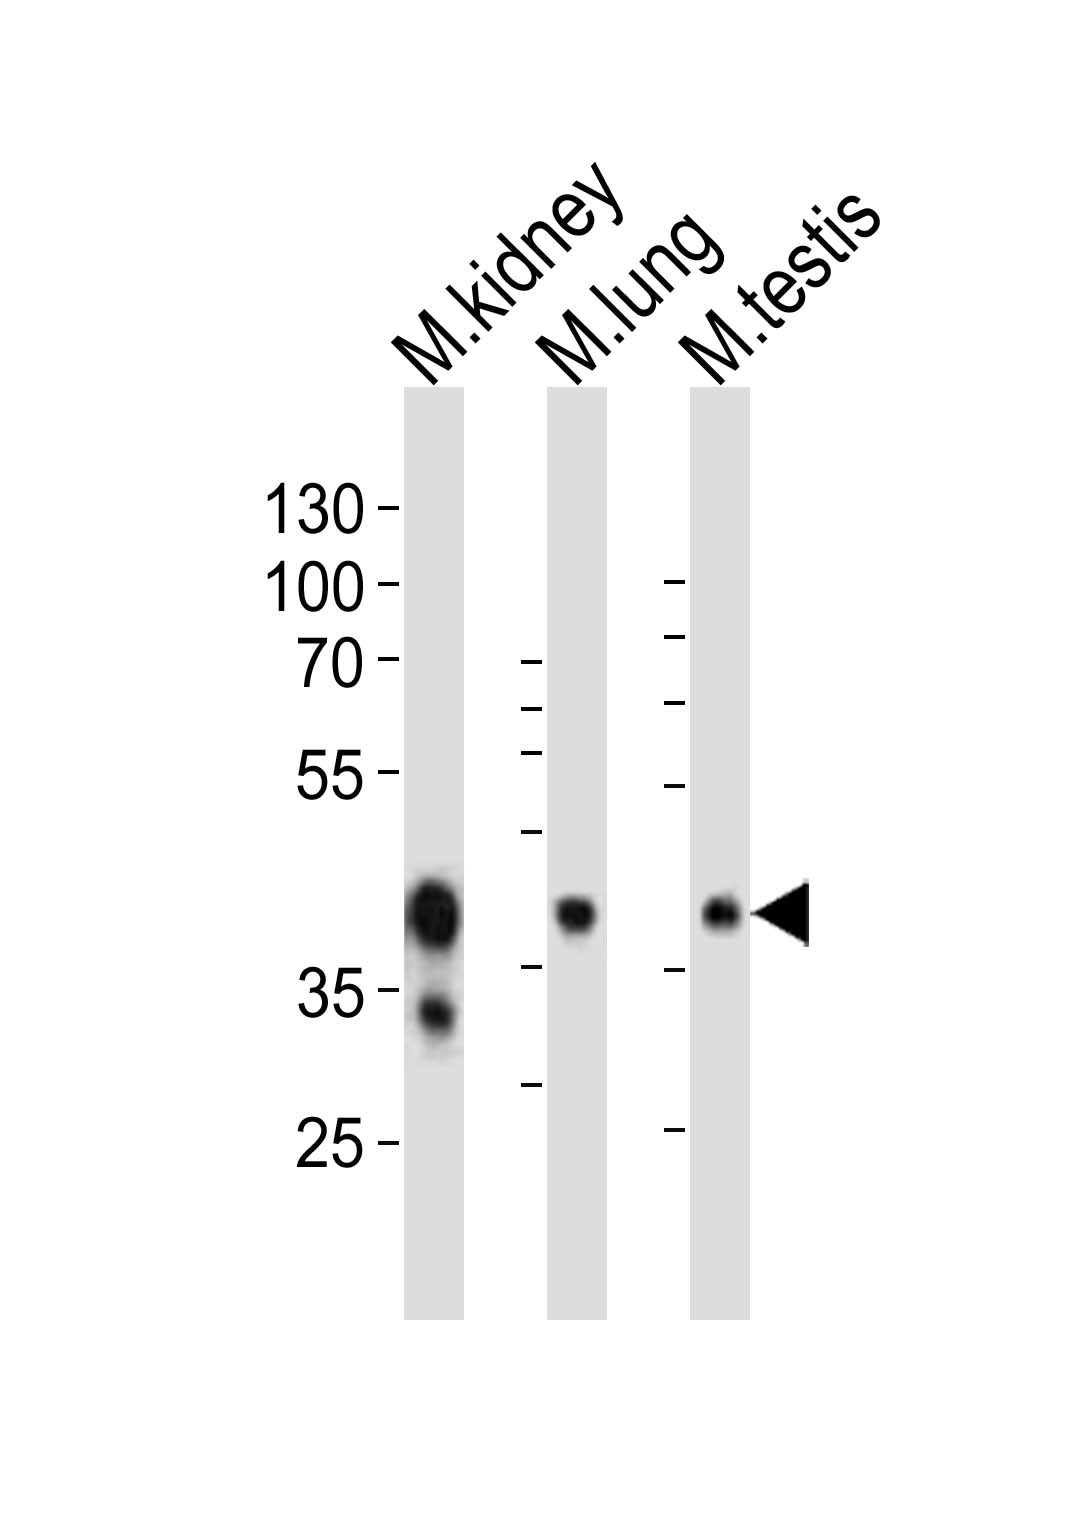 Western blot analysis of lysates from mouse kidney, mouse lung, mouse testis tissue lysate (from left to right),  using Epcam Antibody (C-term)(Cat.  #AP21114a).  AP21114a was diluted at 1:1000 at each lane.  A goat anti-rabbit IgG H&L(HRP) at 1:10000 dilution was used as the secondary antibody. Lysates at 20ug per lane.